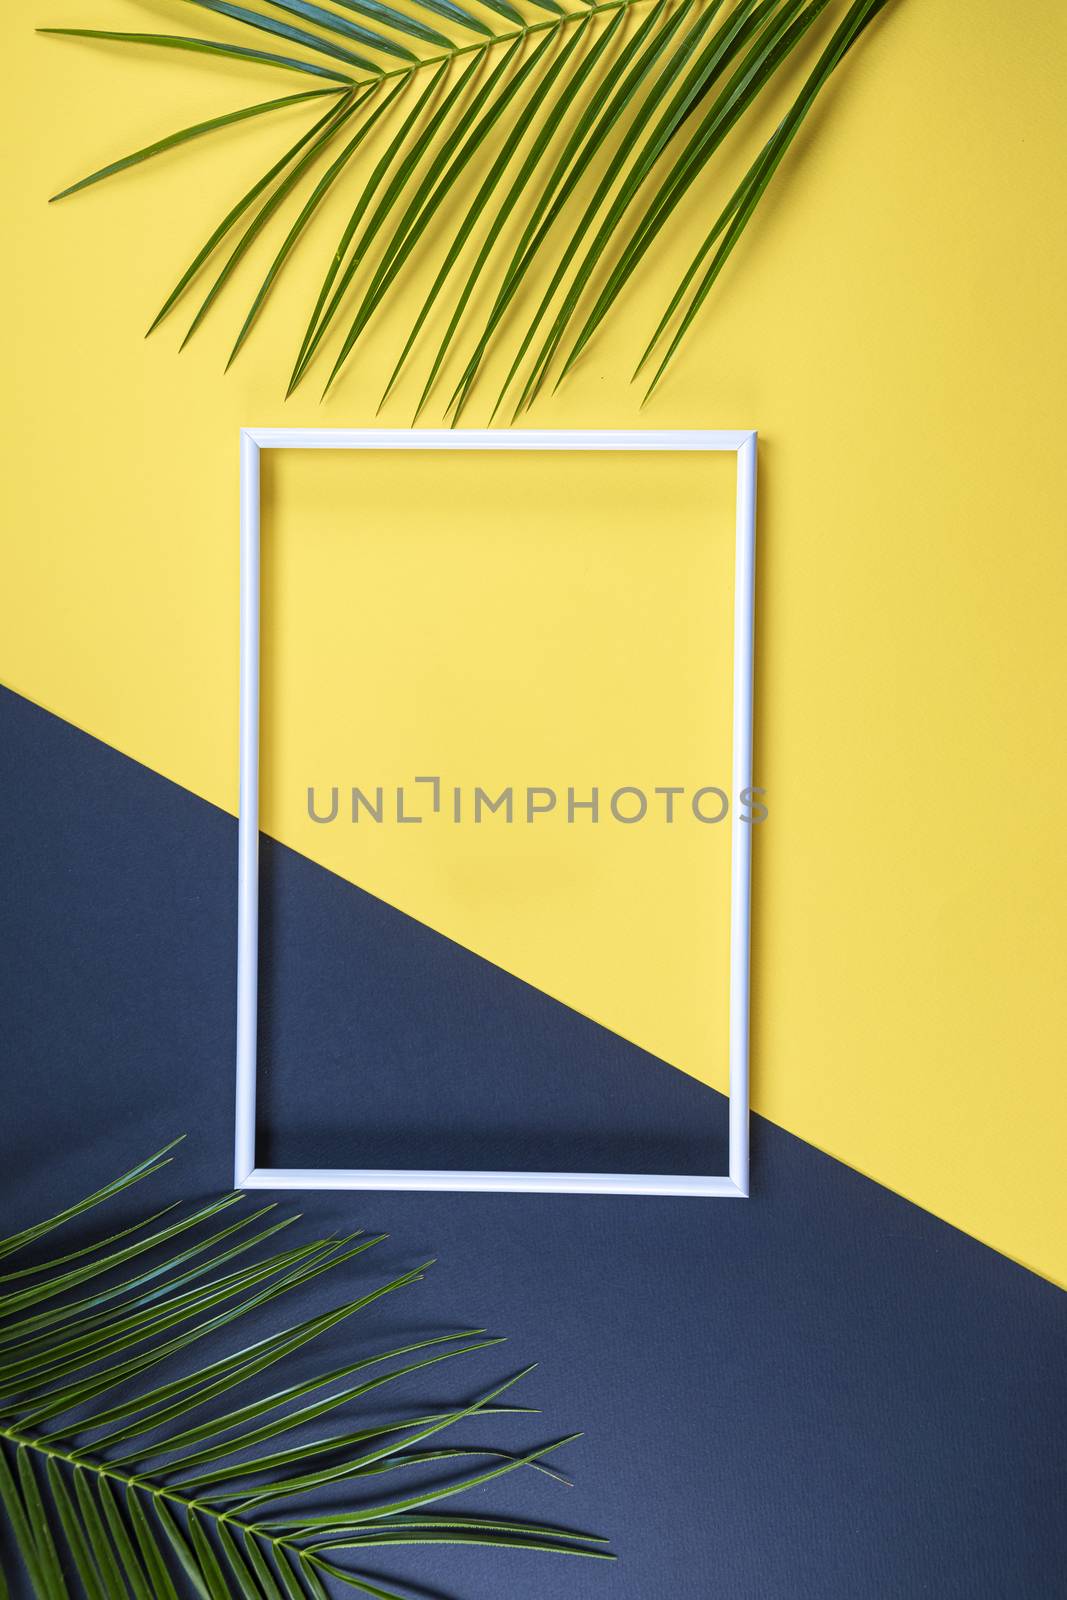 Summer composition with photo frame and green leaves on yellow and black background. Creative mockup with copy space and tropical leaves.

